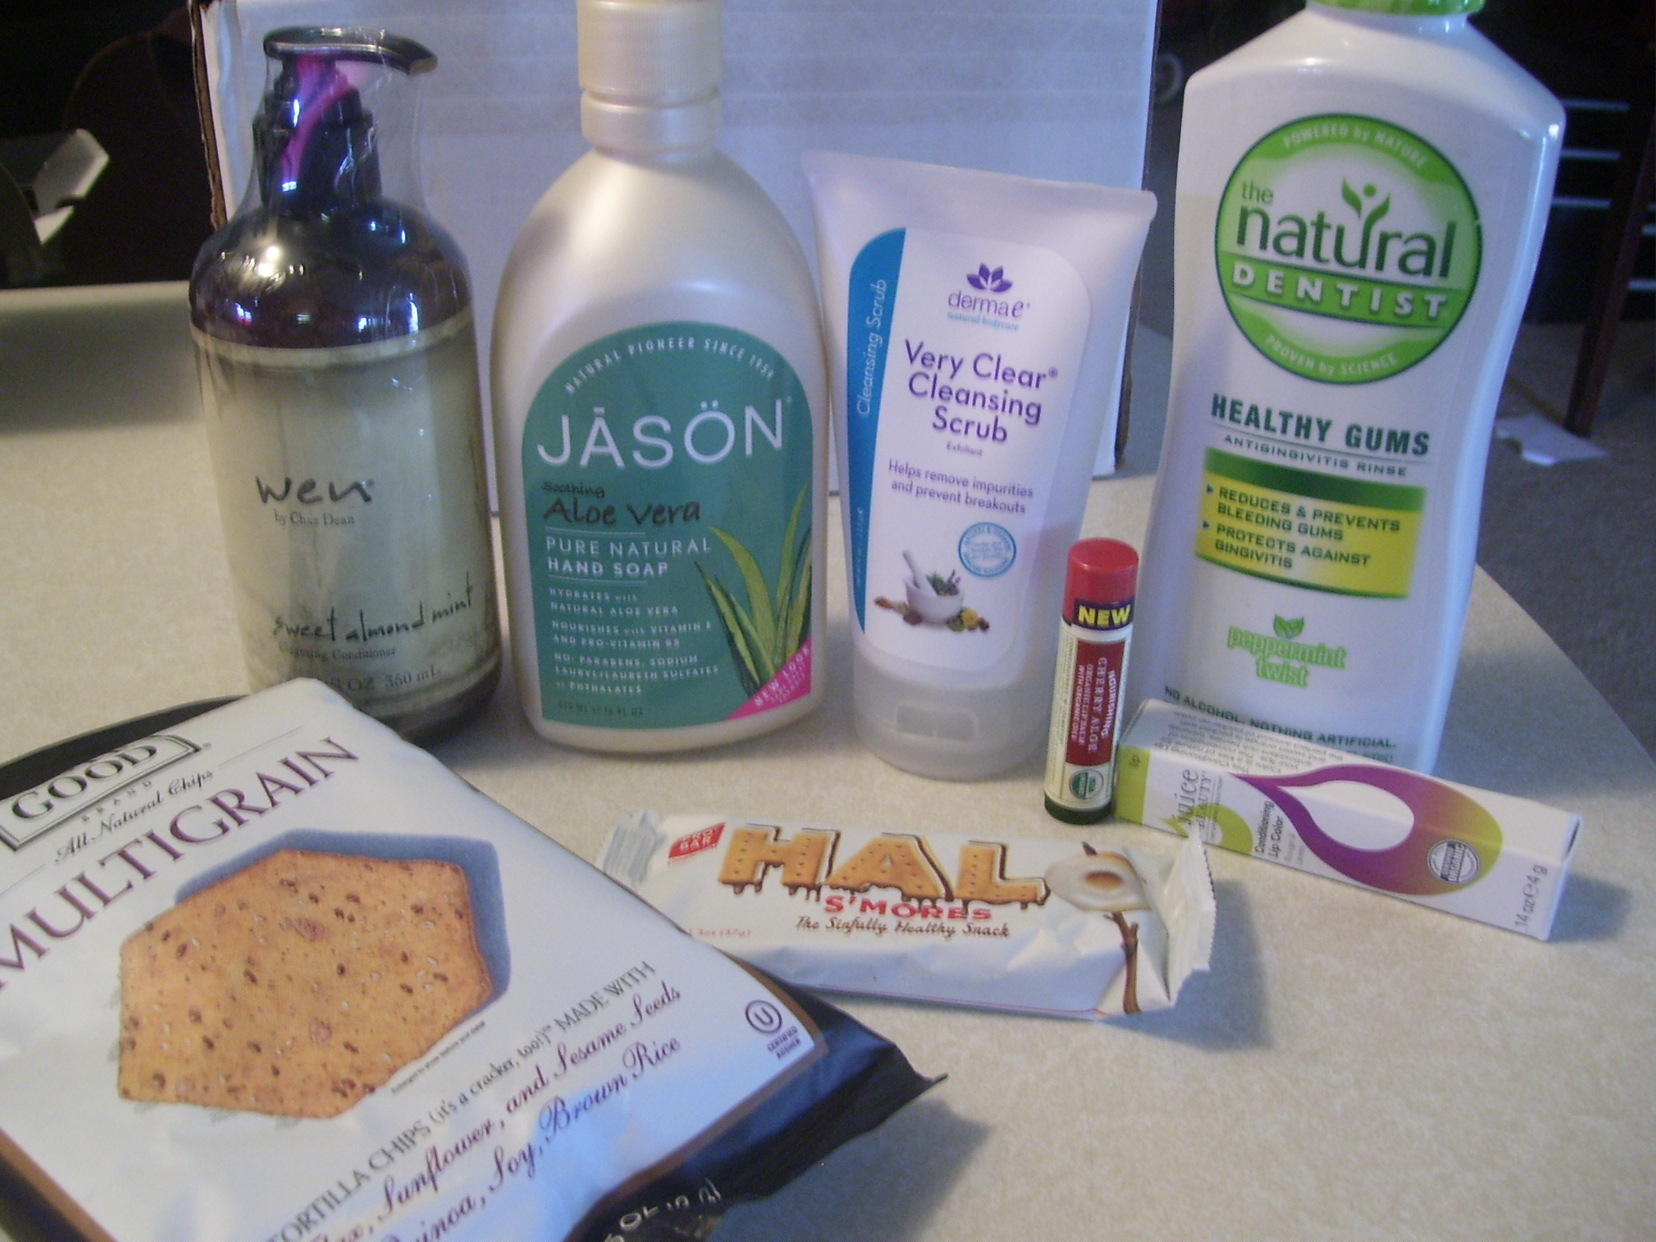 A Peek at the August Natural VoxBox from Influenster